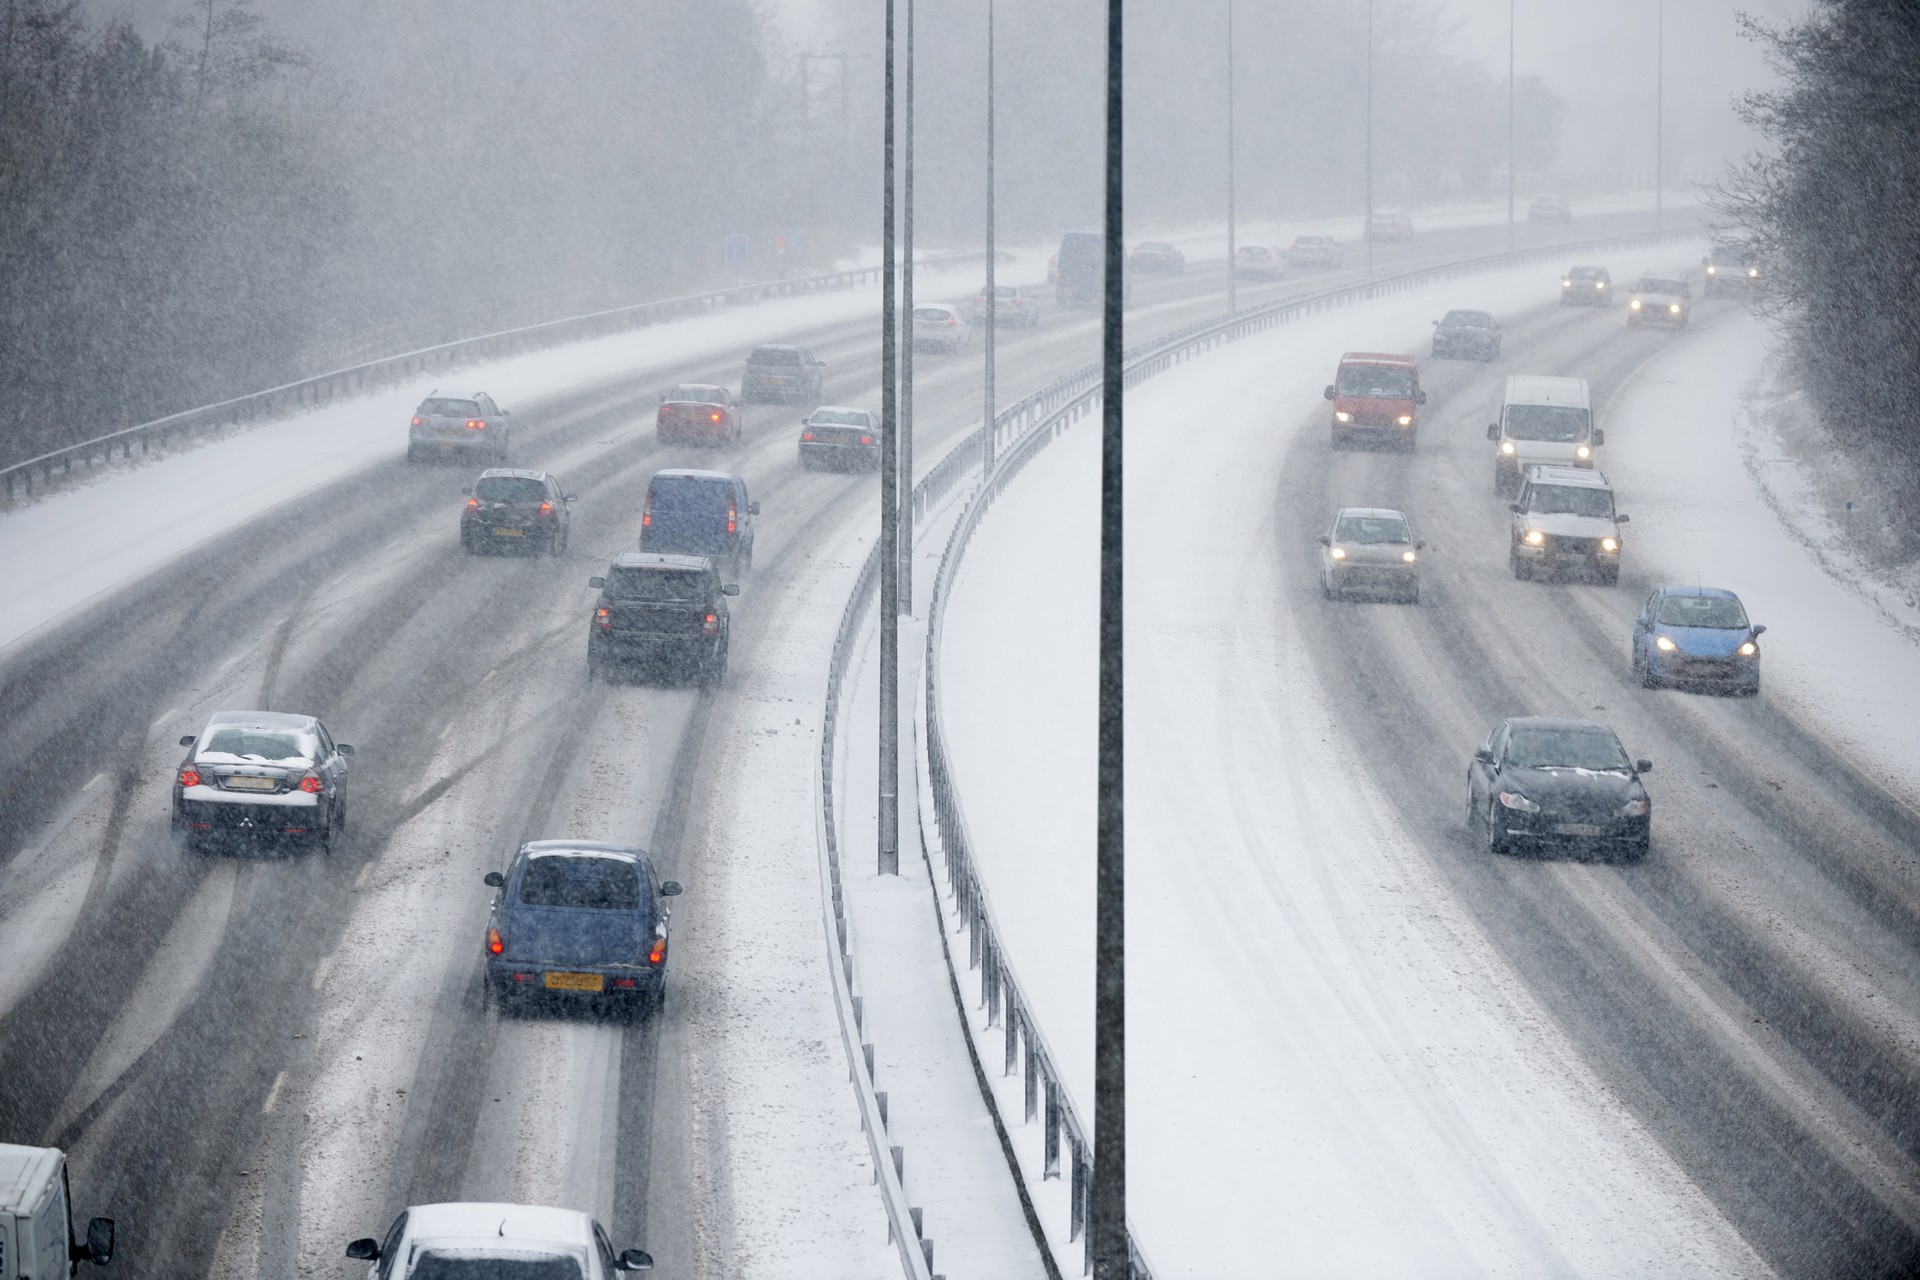 Drivers urged to take care in snow and ice. 